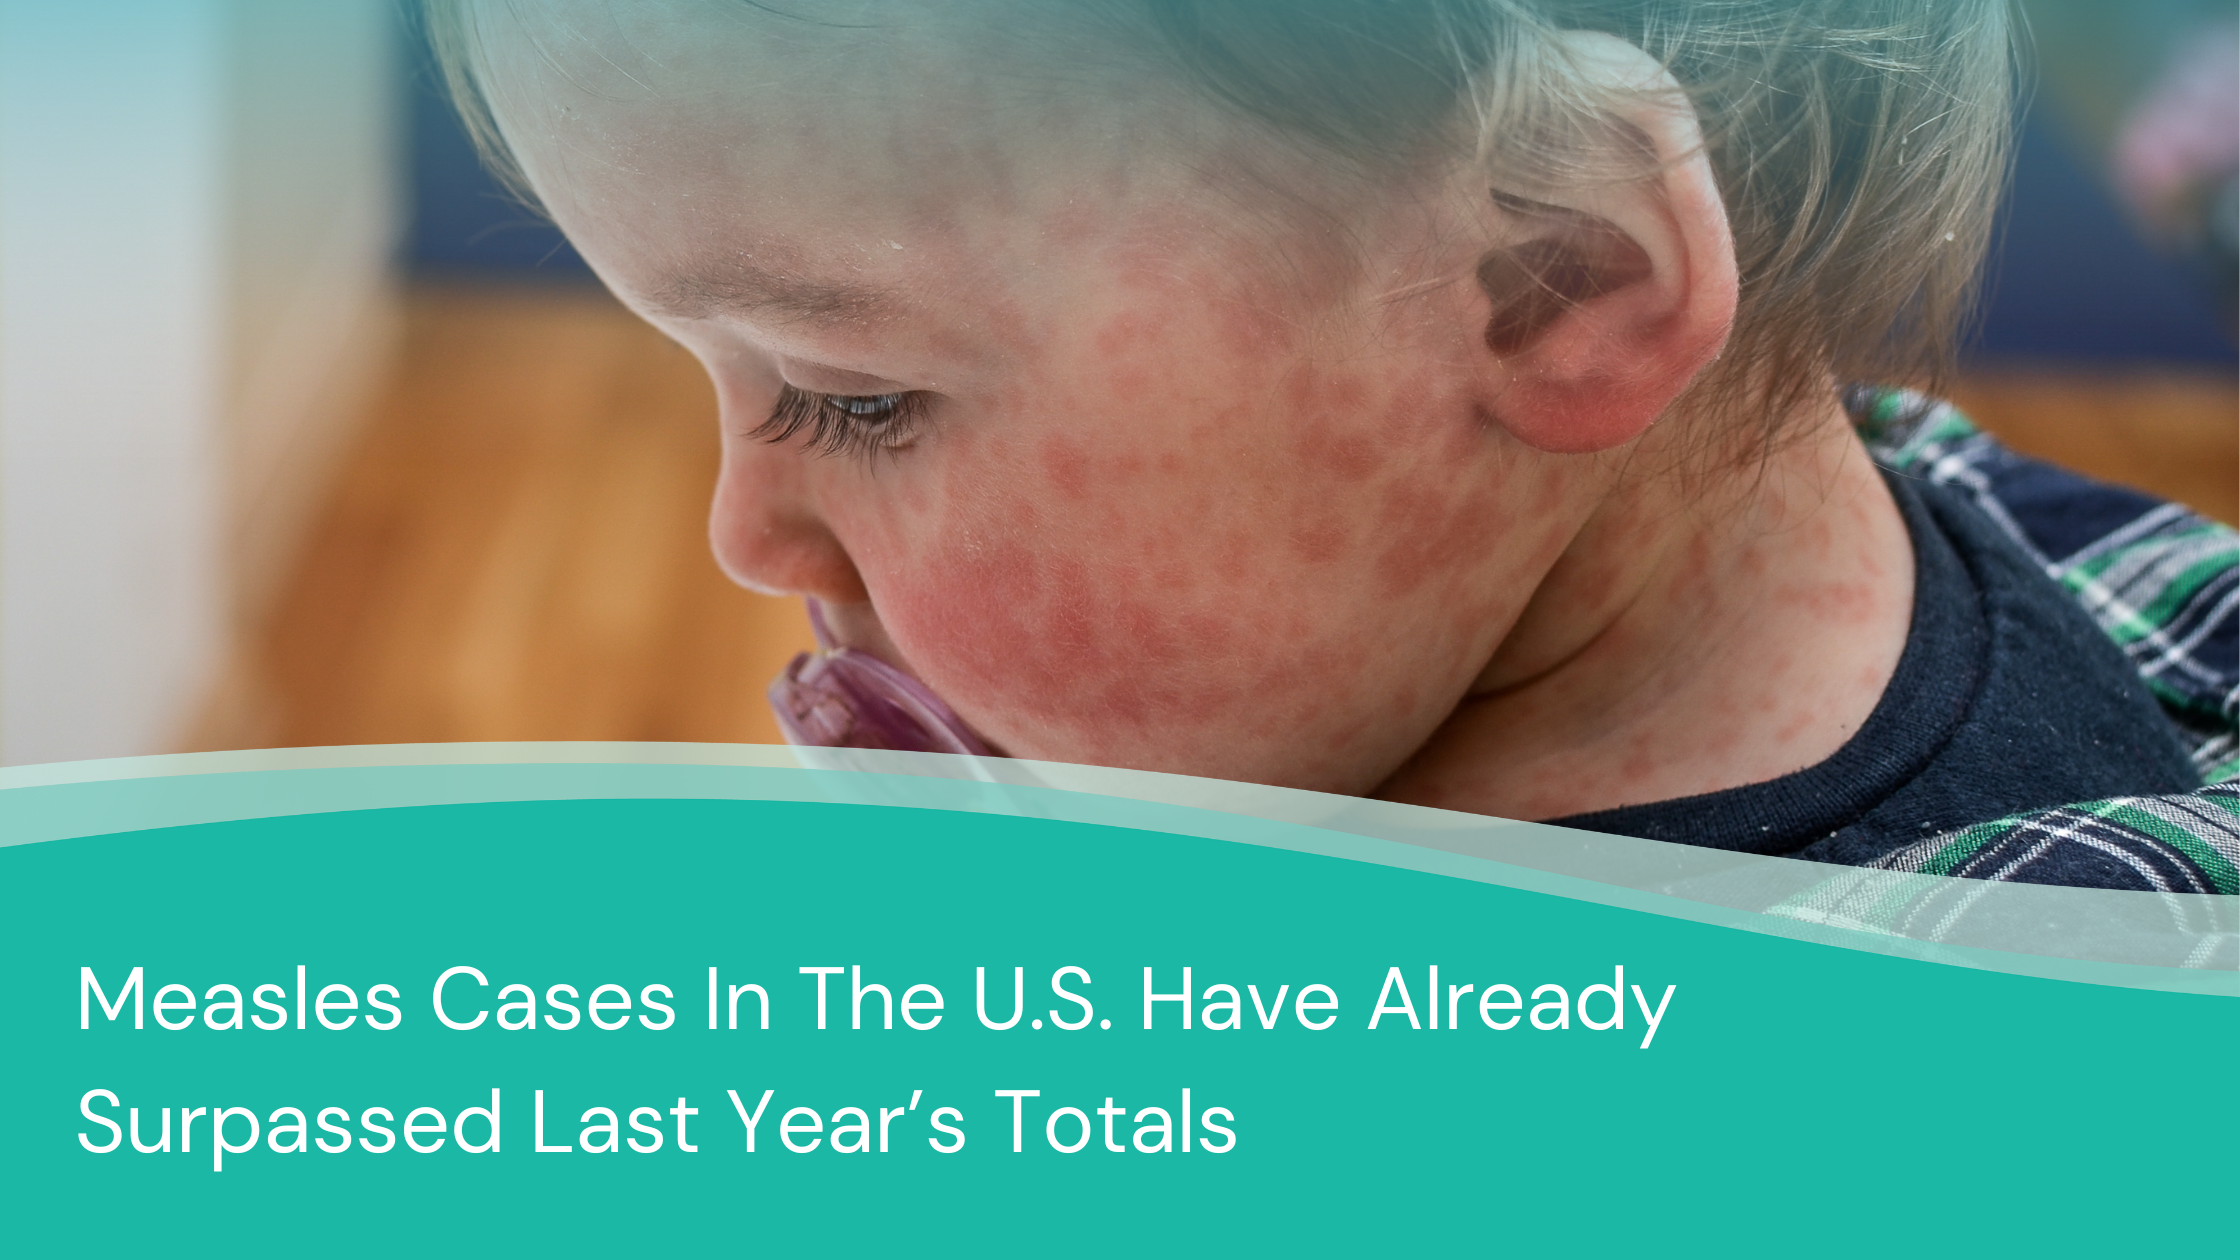 Measles Cases On The Rise In The U.S.